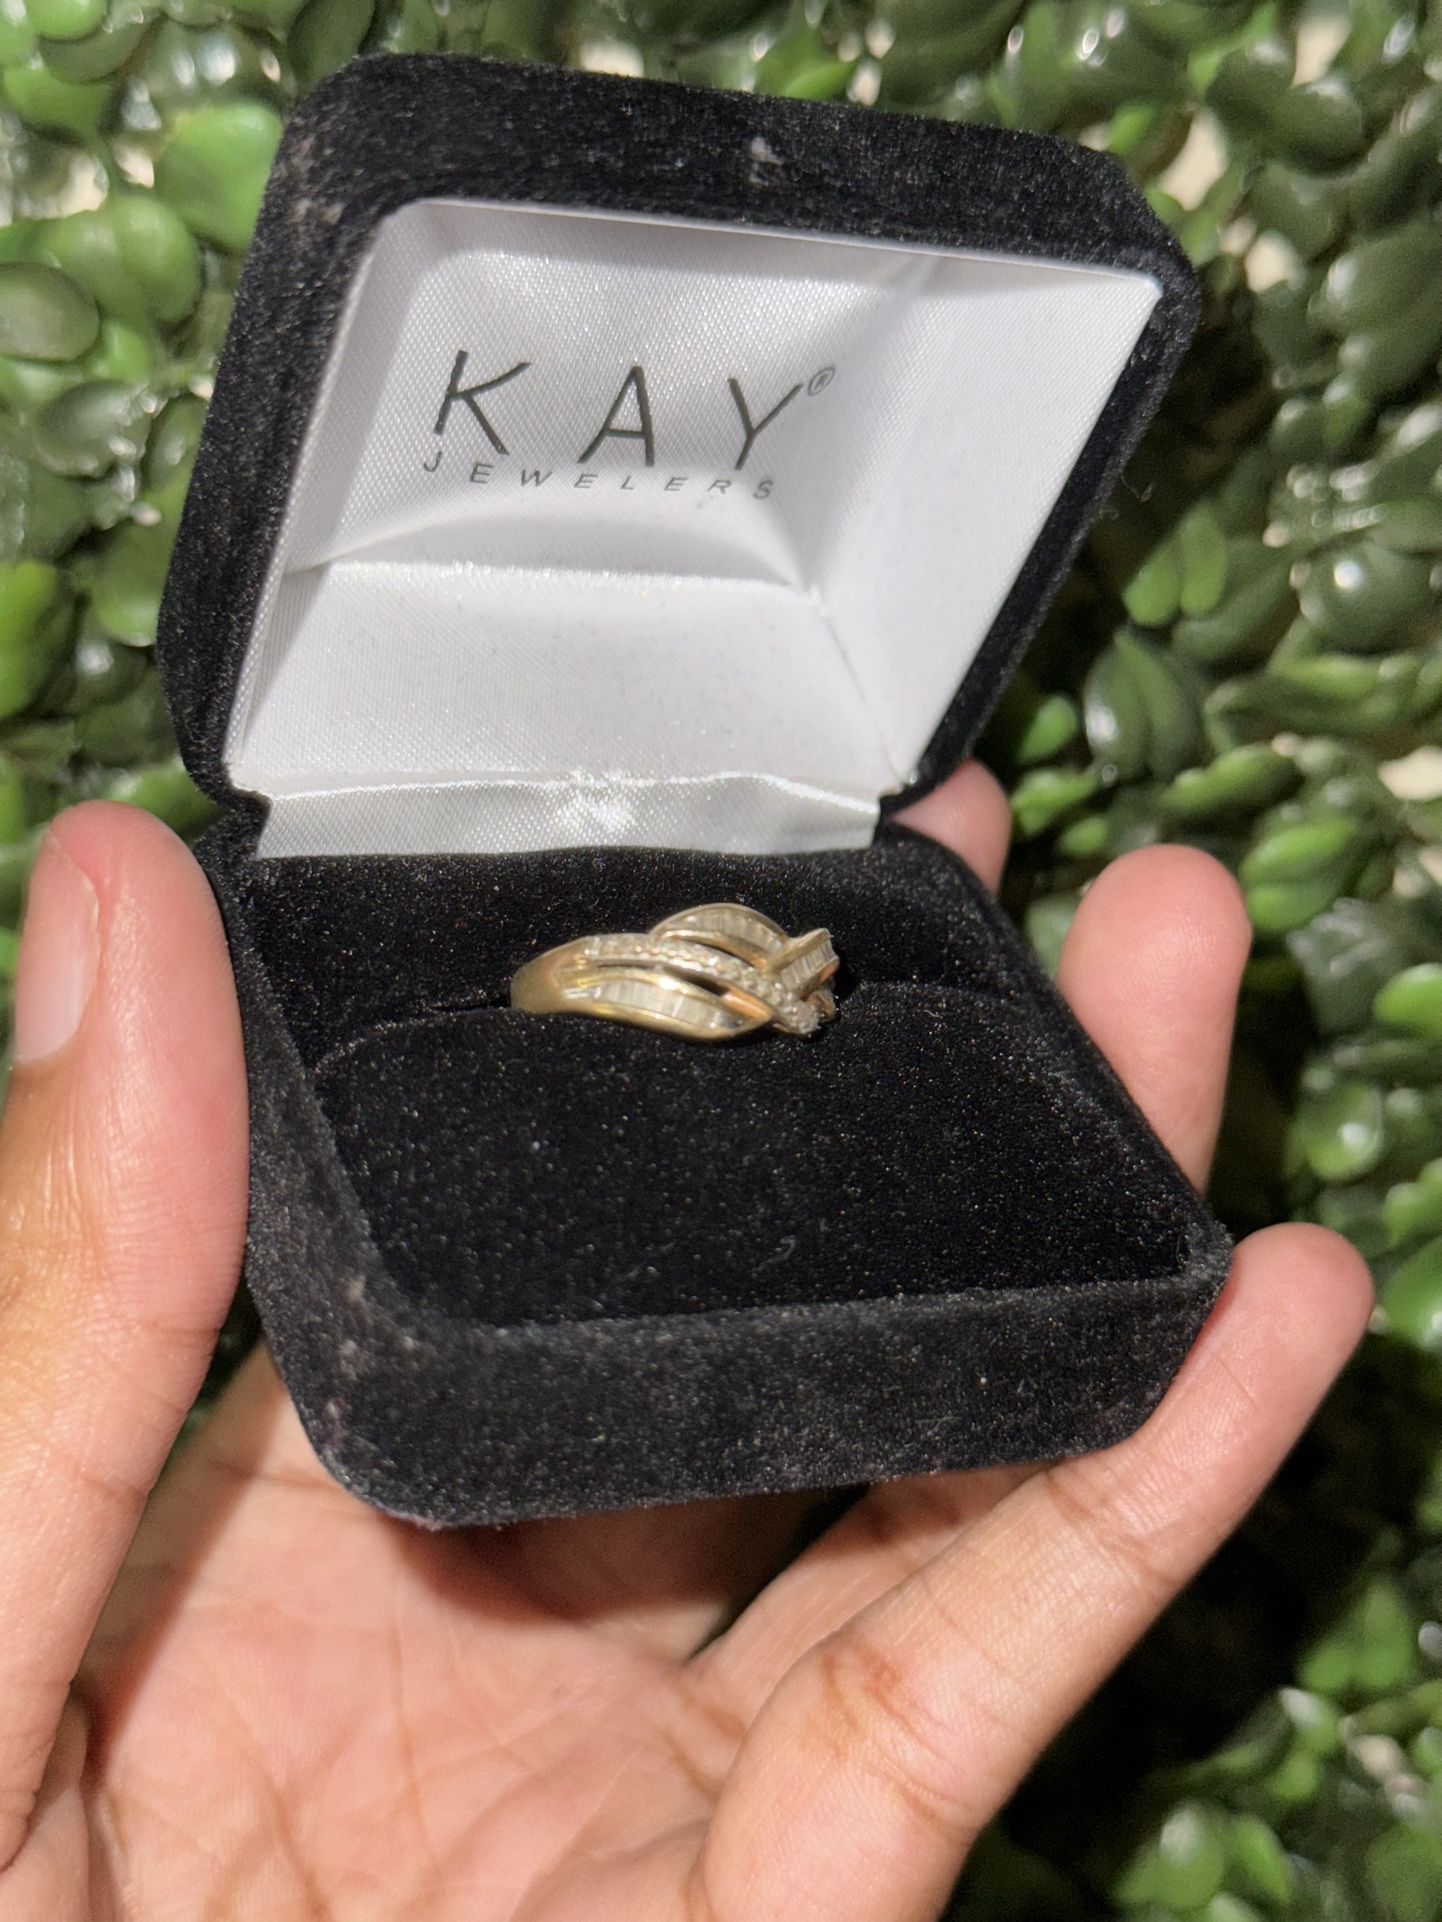 Kay Jewelers Promise Ring